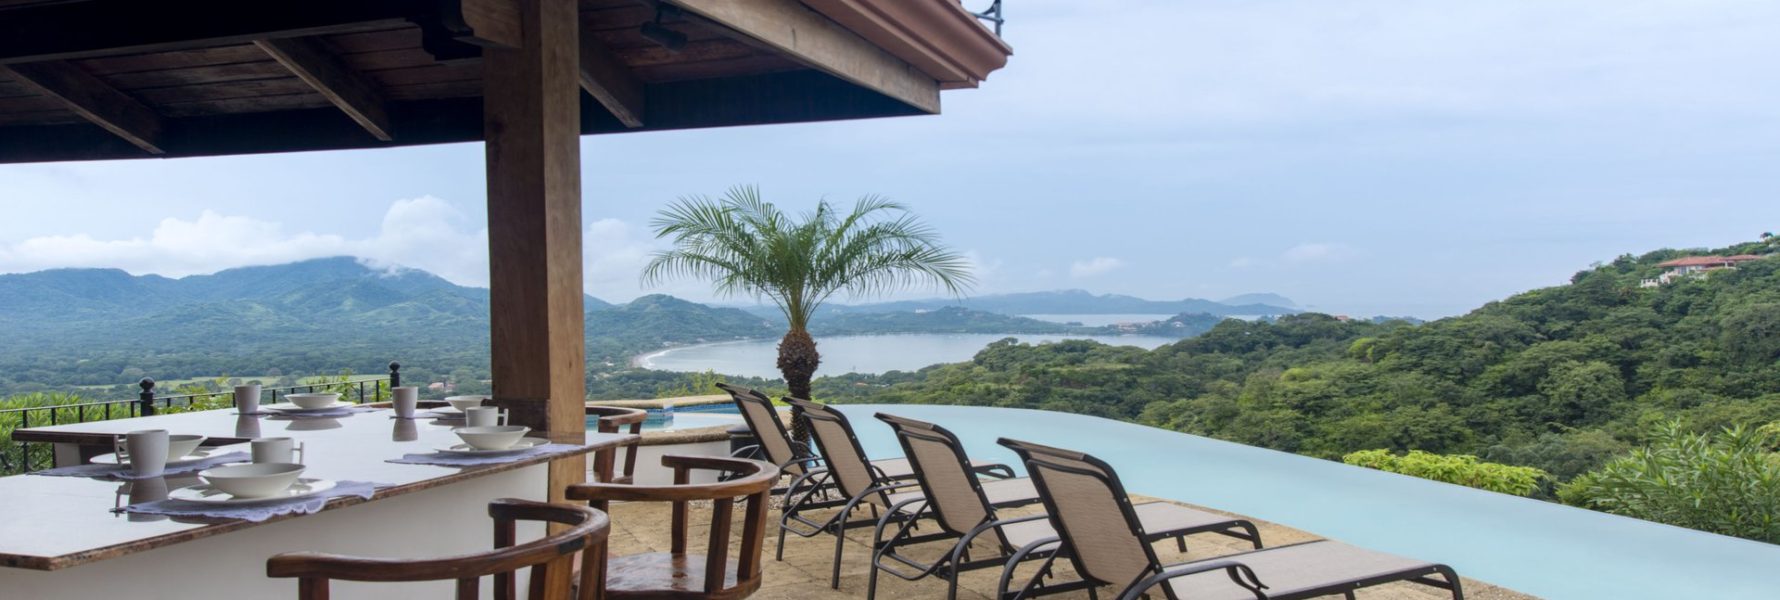 The views, the sun, and the beauty of Playa Flamingo all are here at this villa.